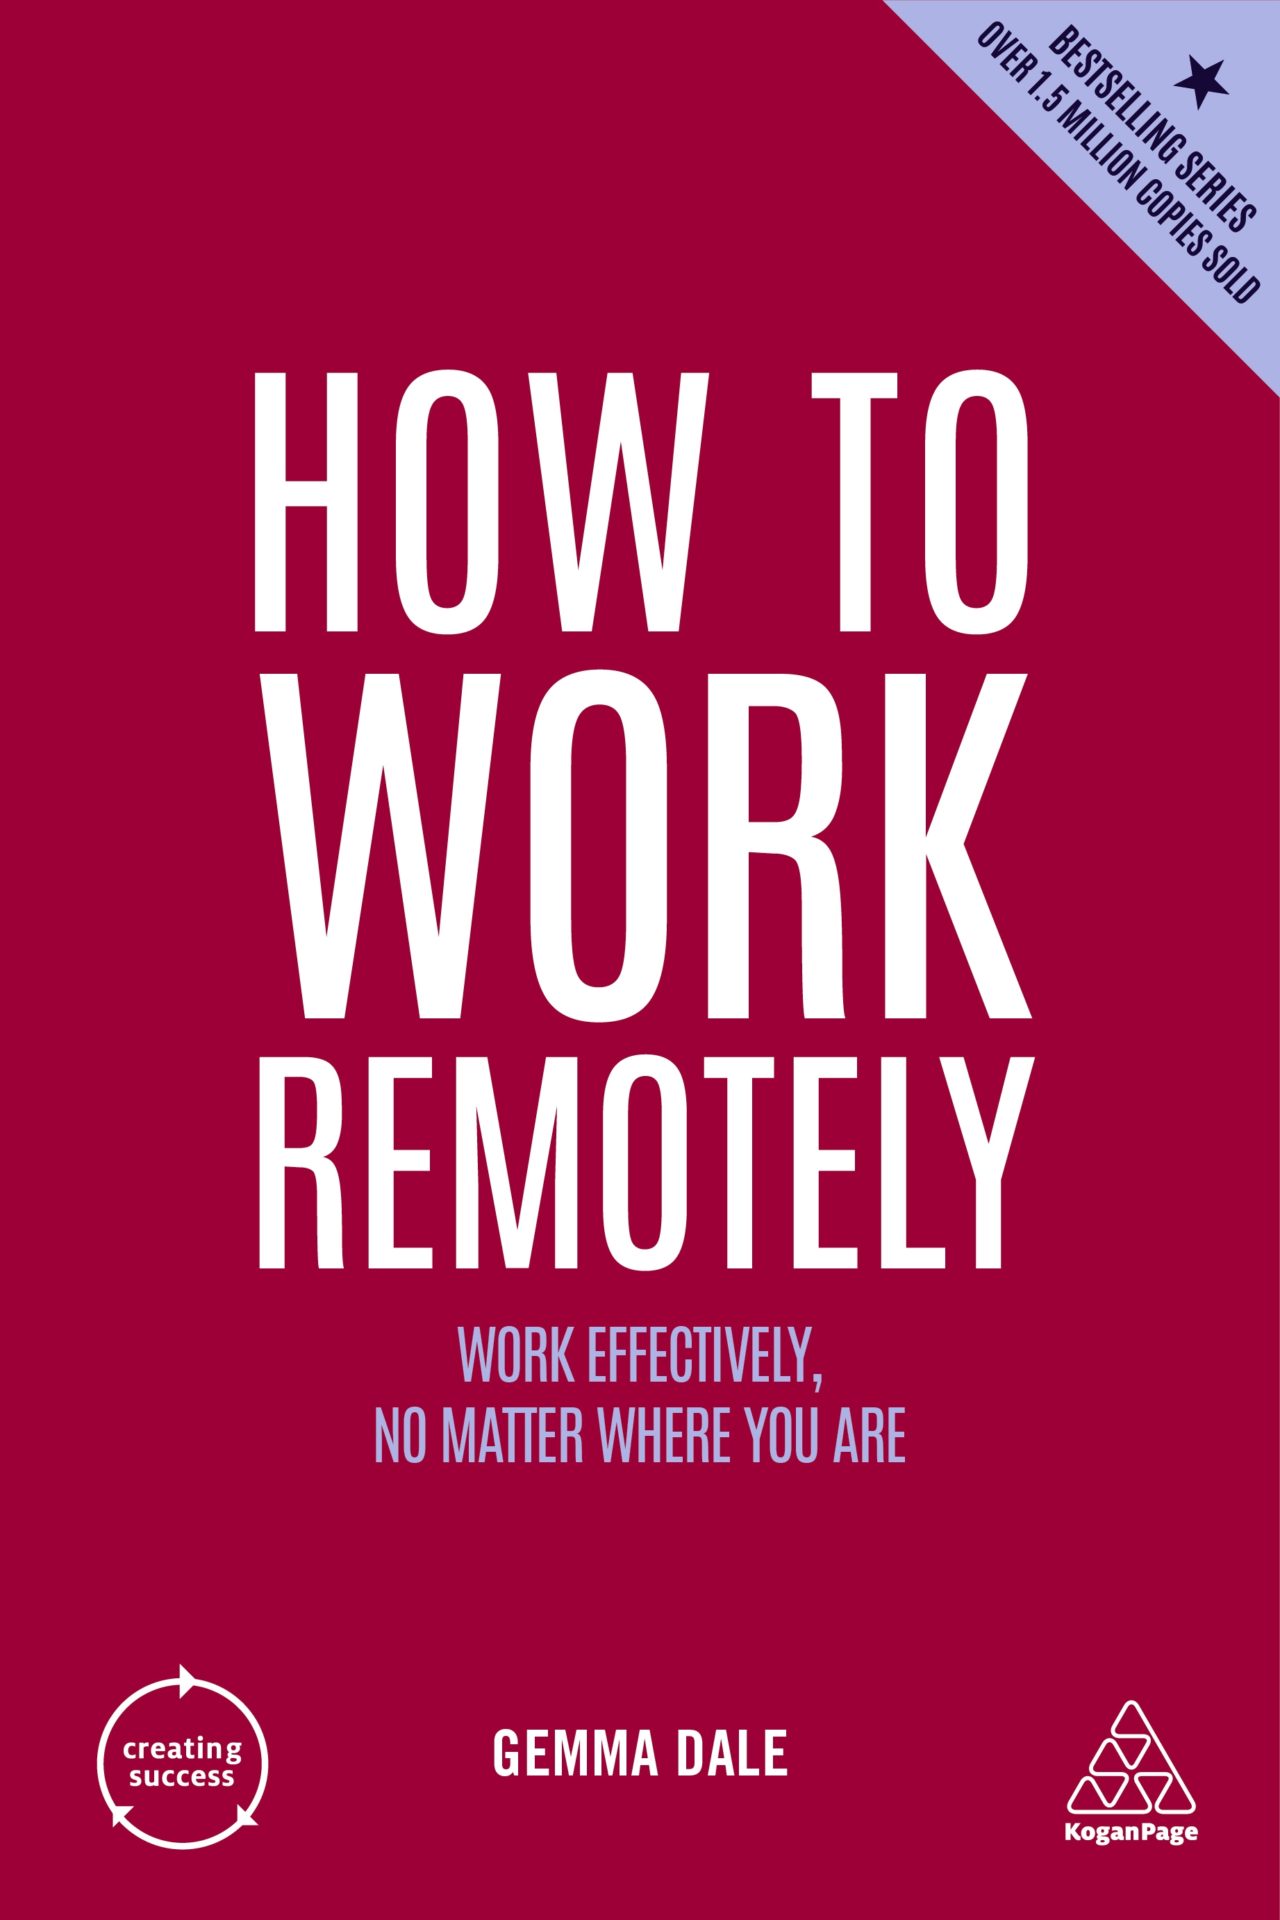 AMBA Book Club: How to Work Remotely